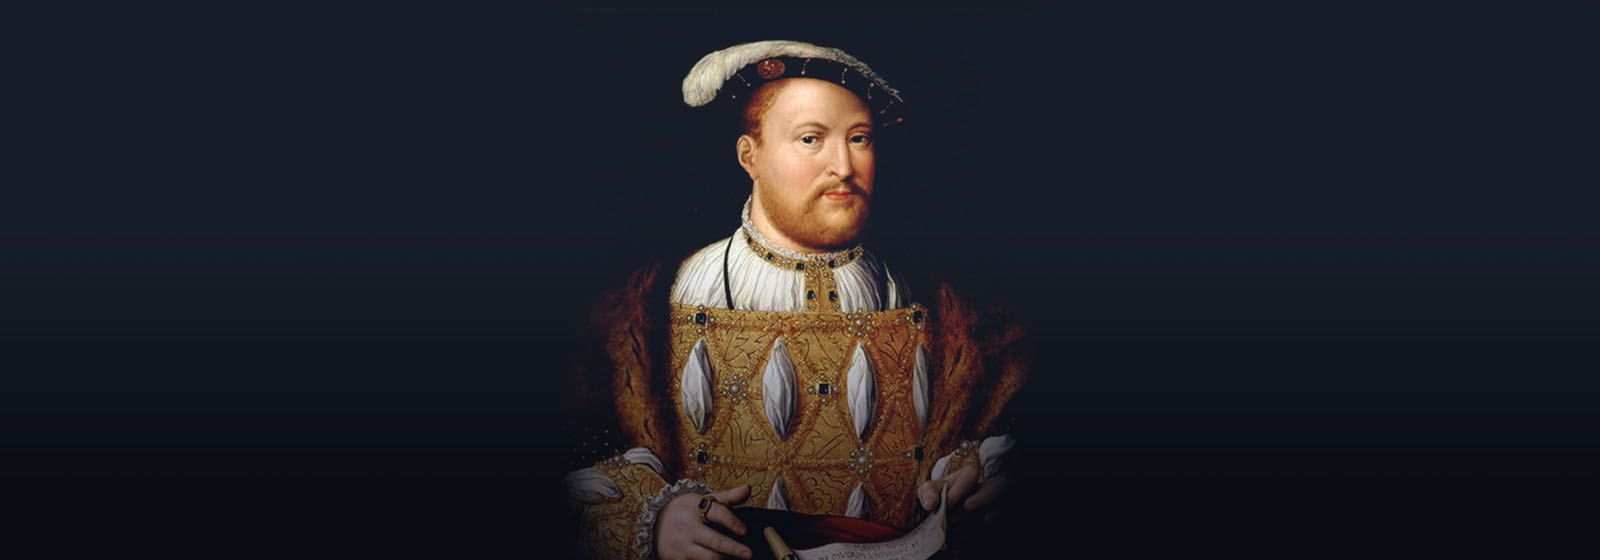 15 FUN FACTS ABOUT HENRY VIII